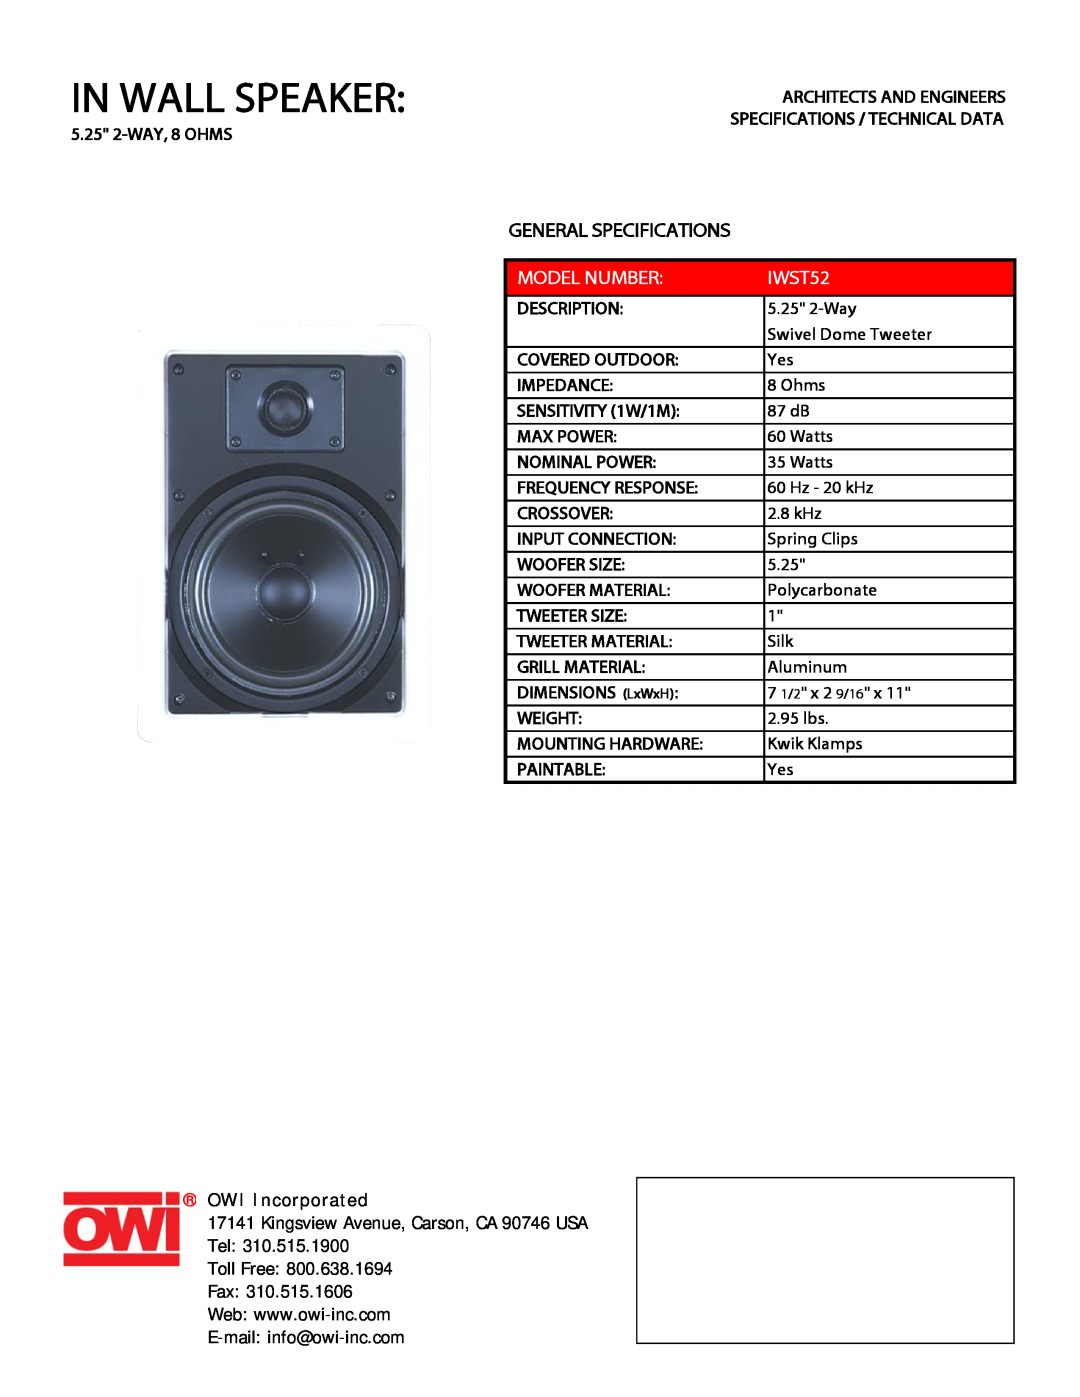 OWI IWST52 specifications In Wall Speaker, General Specifications, Model Number, OWI Incorporated 